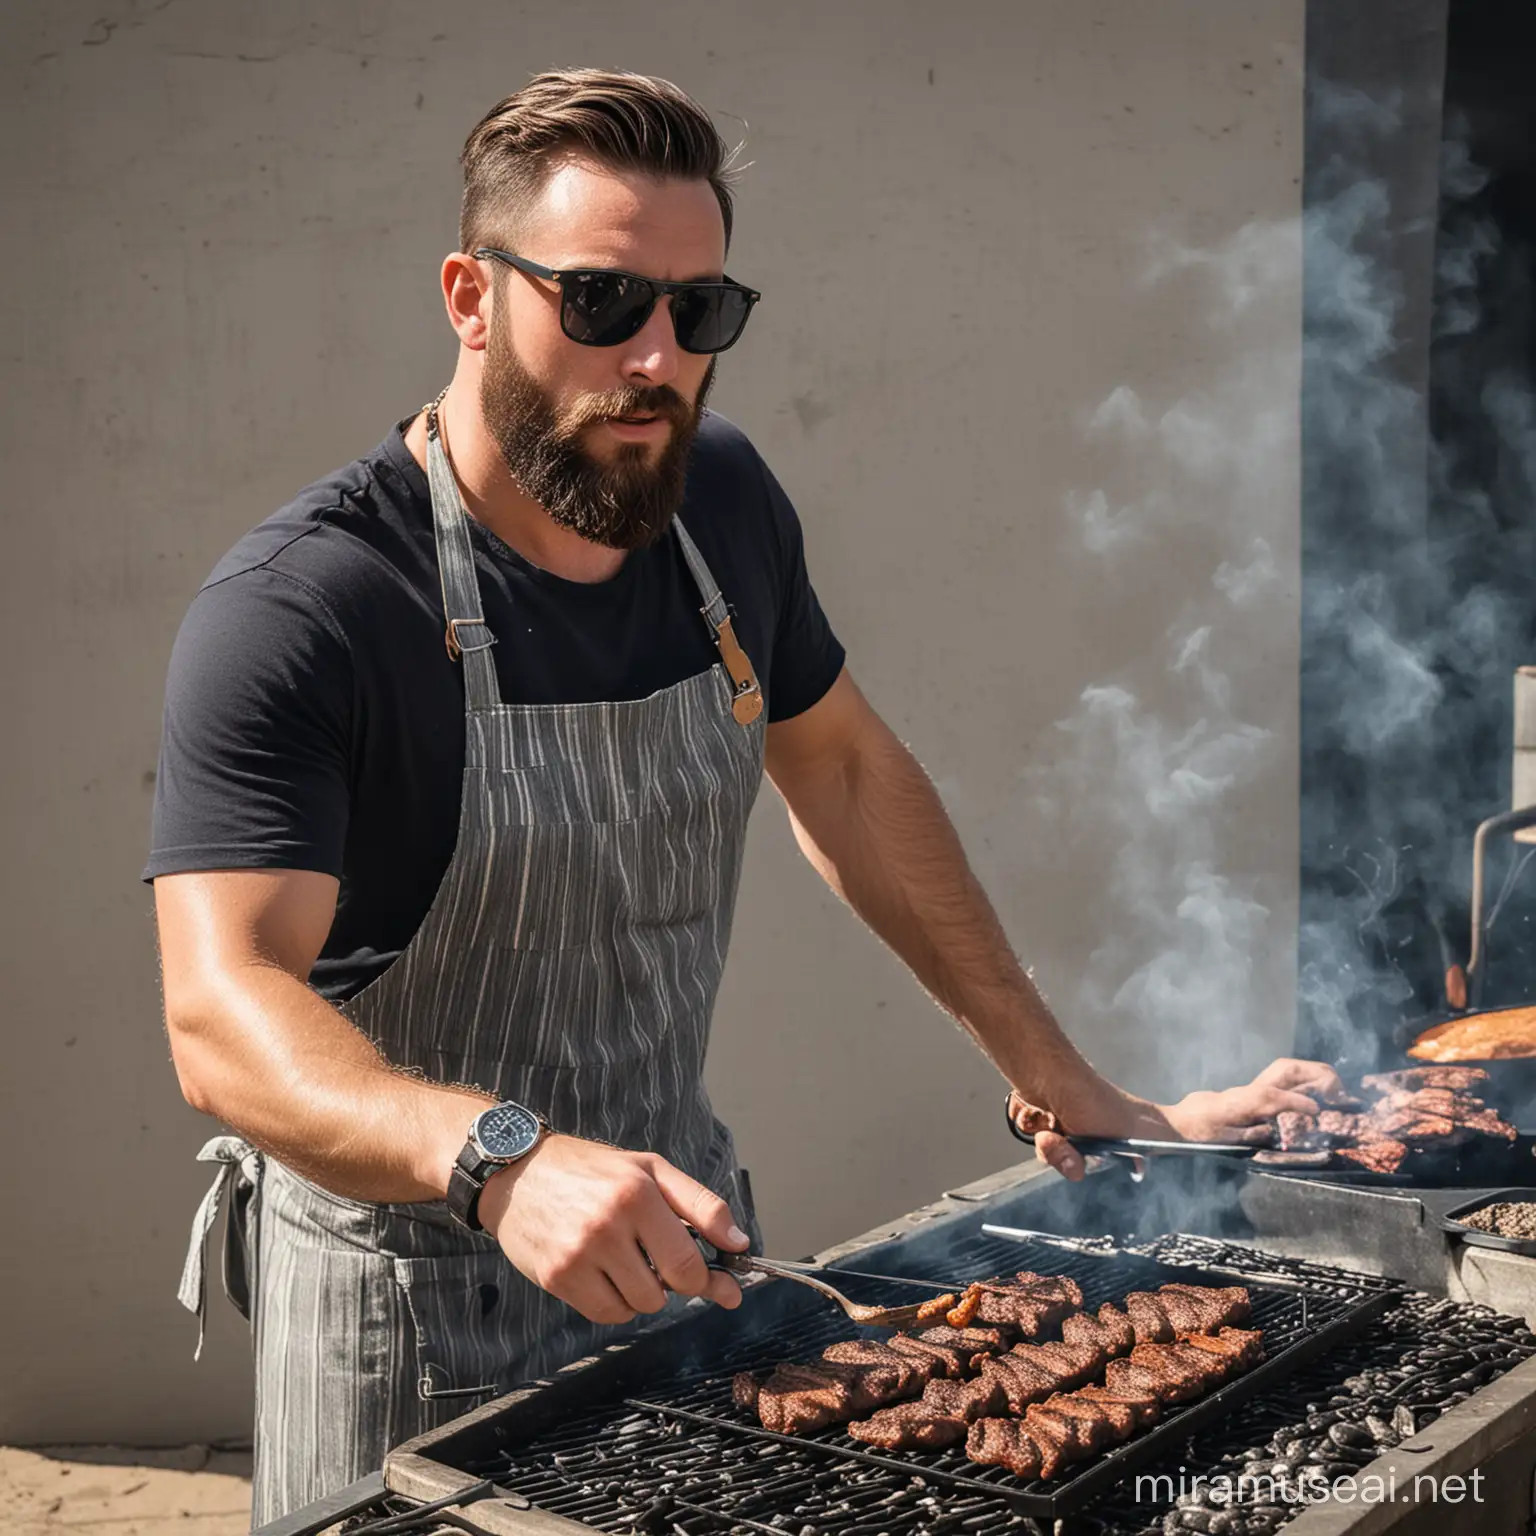 man grilling with beard and sunglasses, using an apron, cuban chain and black watch